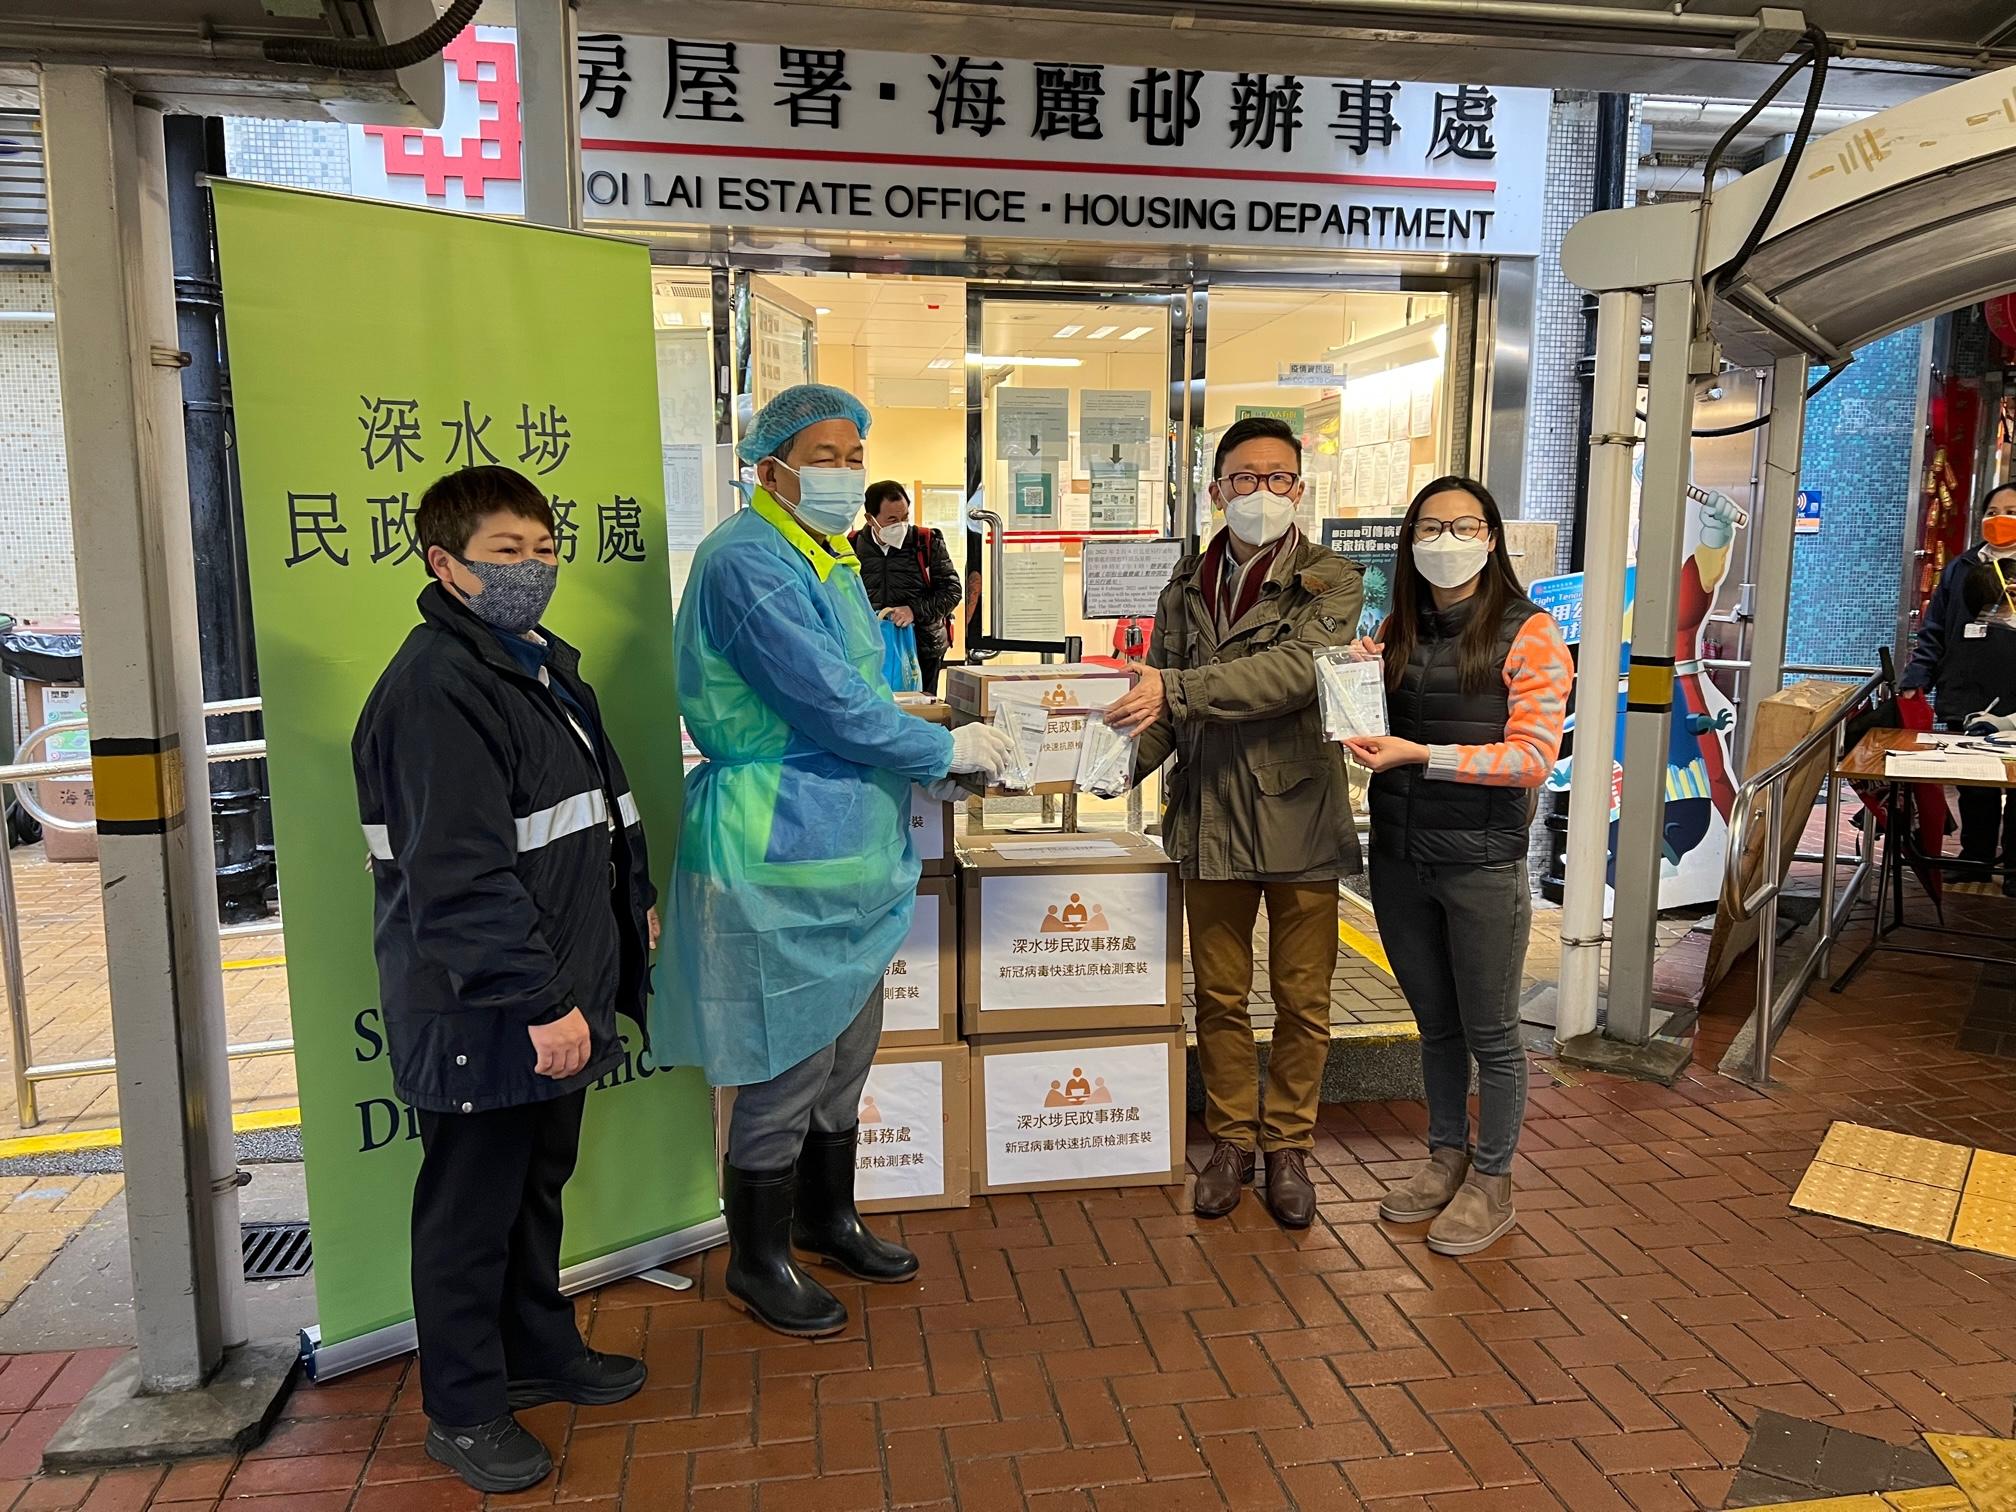 The Sham Shui Po District Office today (February 22) distributed rapid test kits to households, cleansing workers and property management staff living and working in Hoi Lai Estate for voluntary testing through the Estate's property management company.